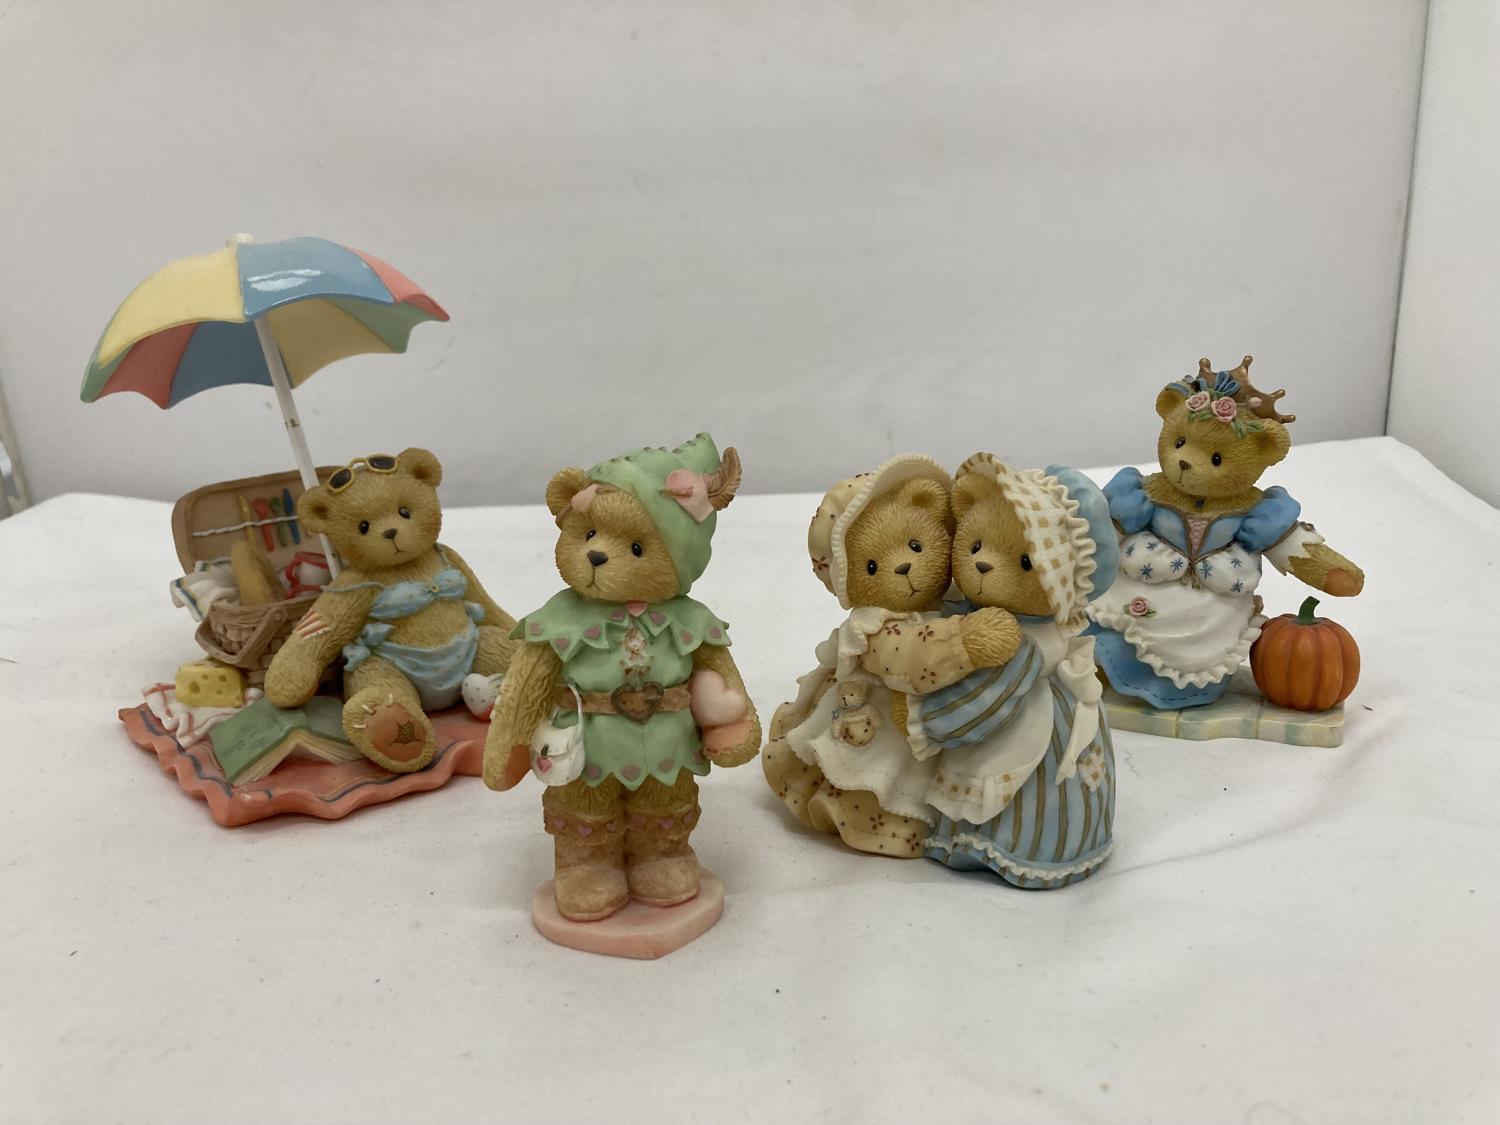 FOUR LIMITED EDITION CHERISHED TEDDIES, 'CHRISTINA', 'ROBIN', 'HALEY AND LOGAN', AND 'JUDY'